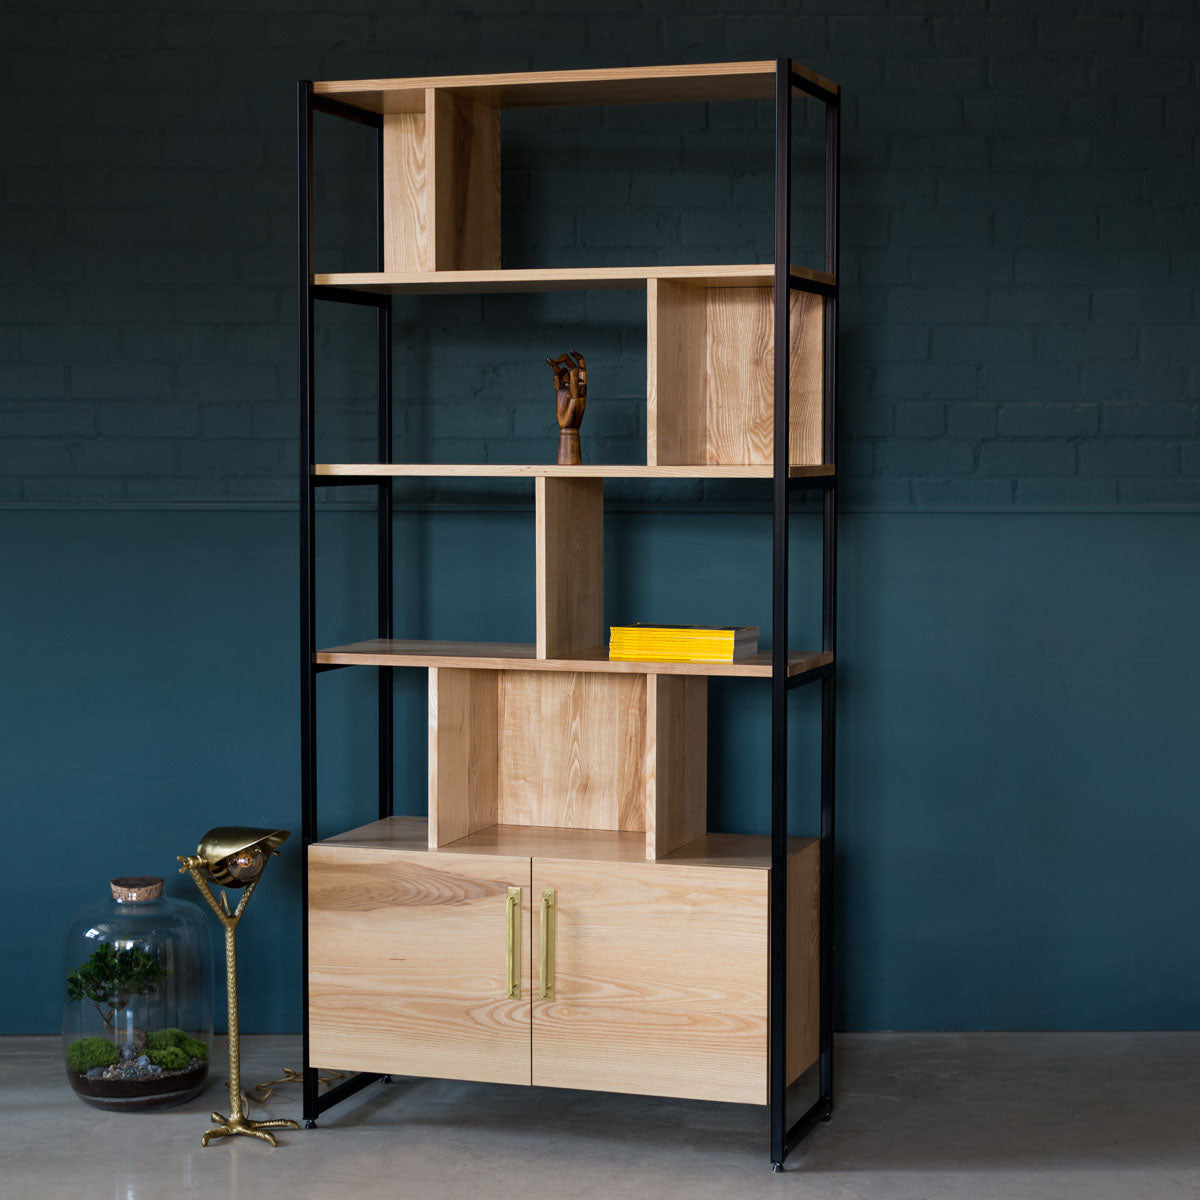 An image of the Bookcase, Aska product available from Koda Studios